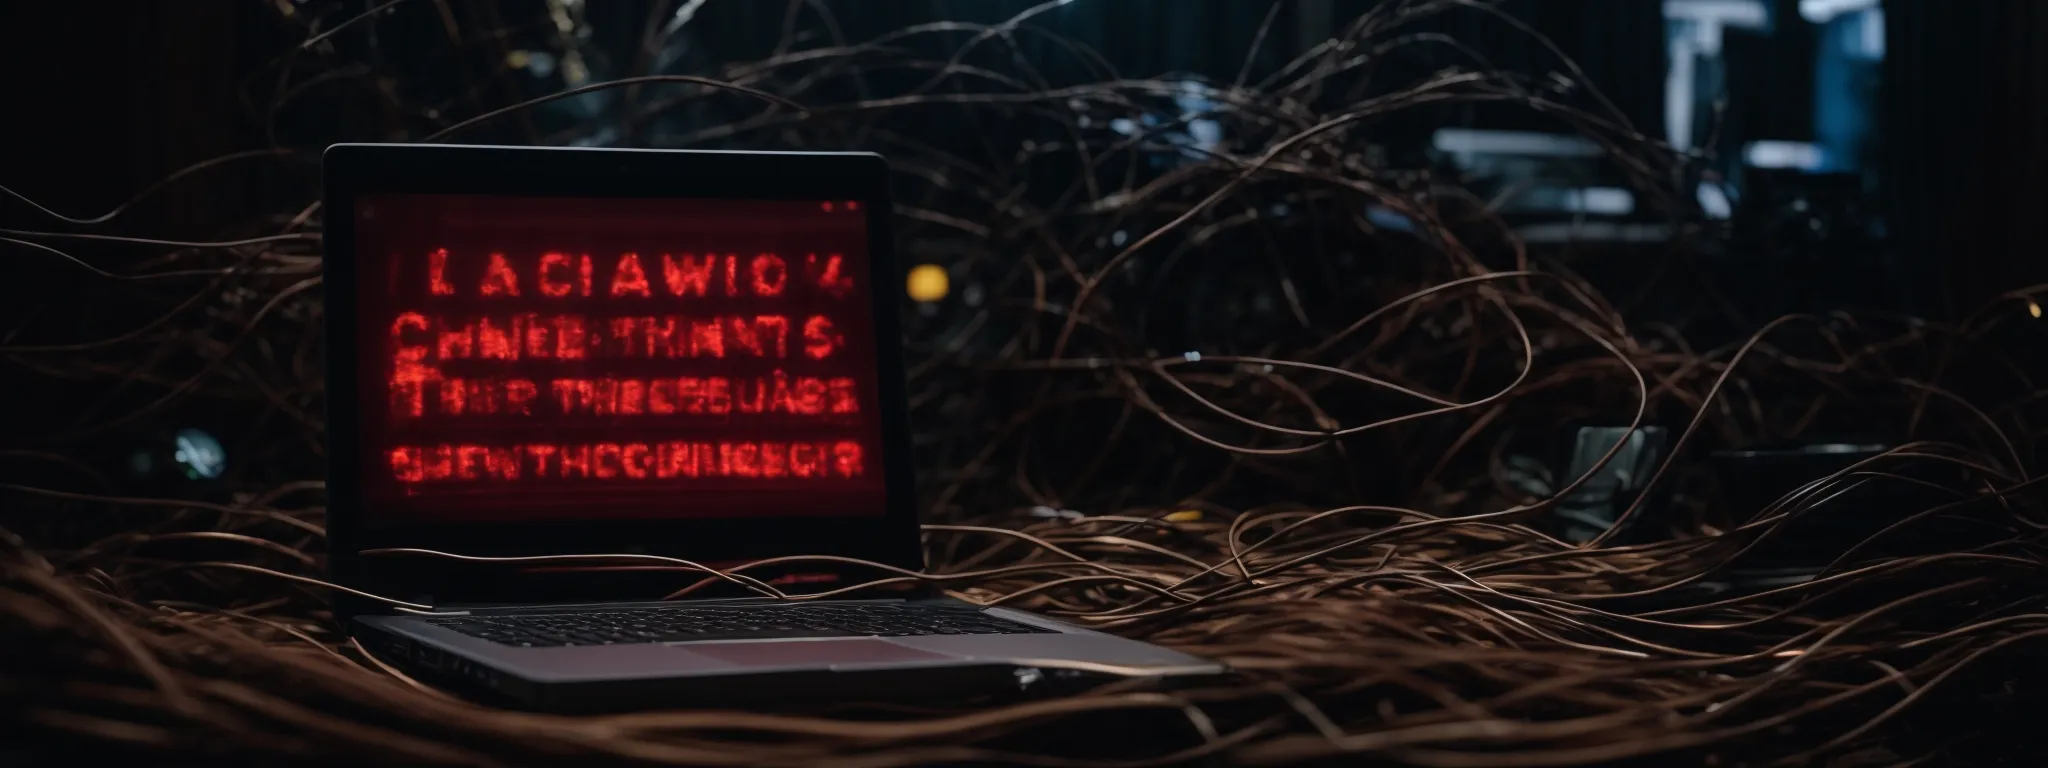 a laptop displaying a warning sign amidst a scene suggesting cyber threats, with a tangle of wires and shadowy figures in the background.